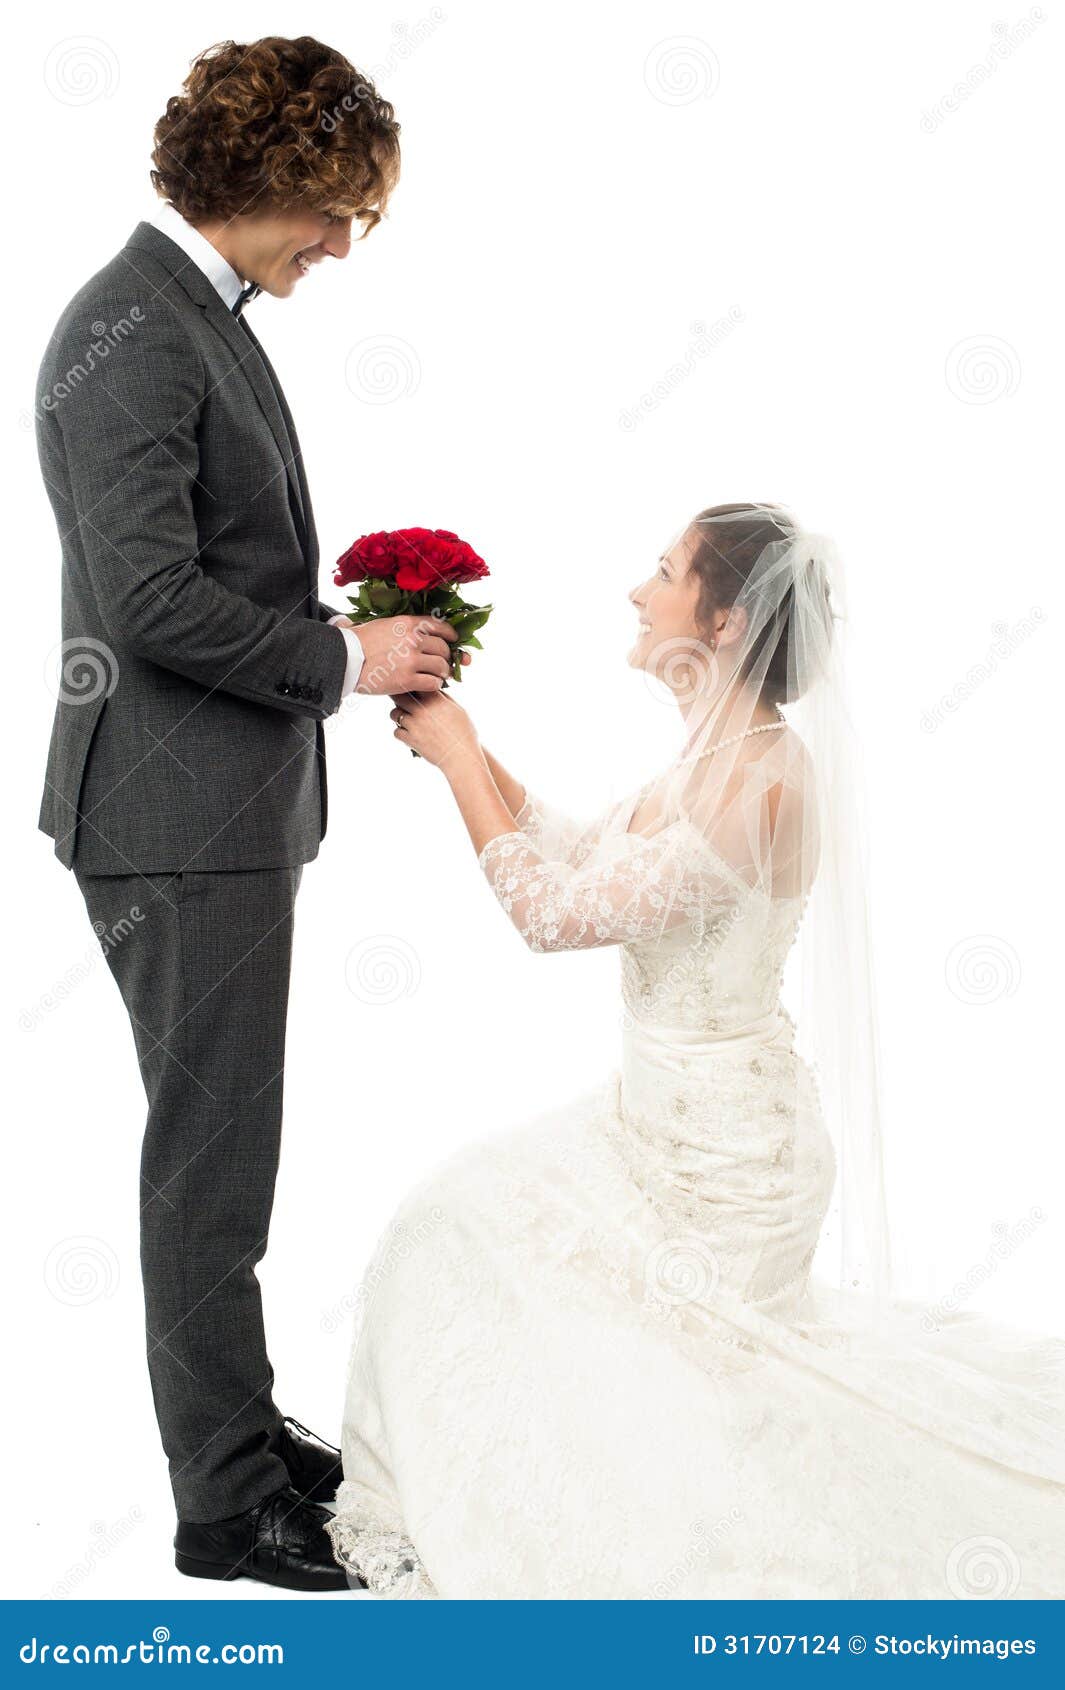 12 Please Marry Me Photos Free Royalty Free Stock Photos From Dreamstime